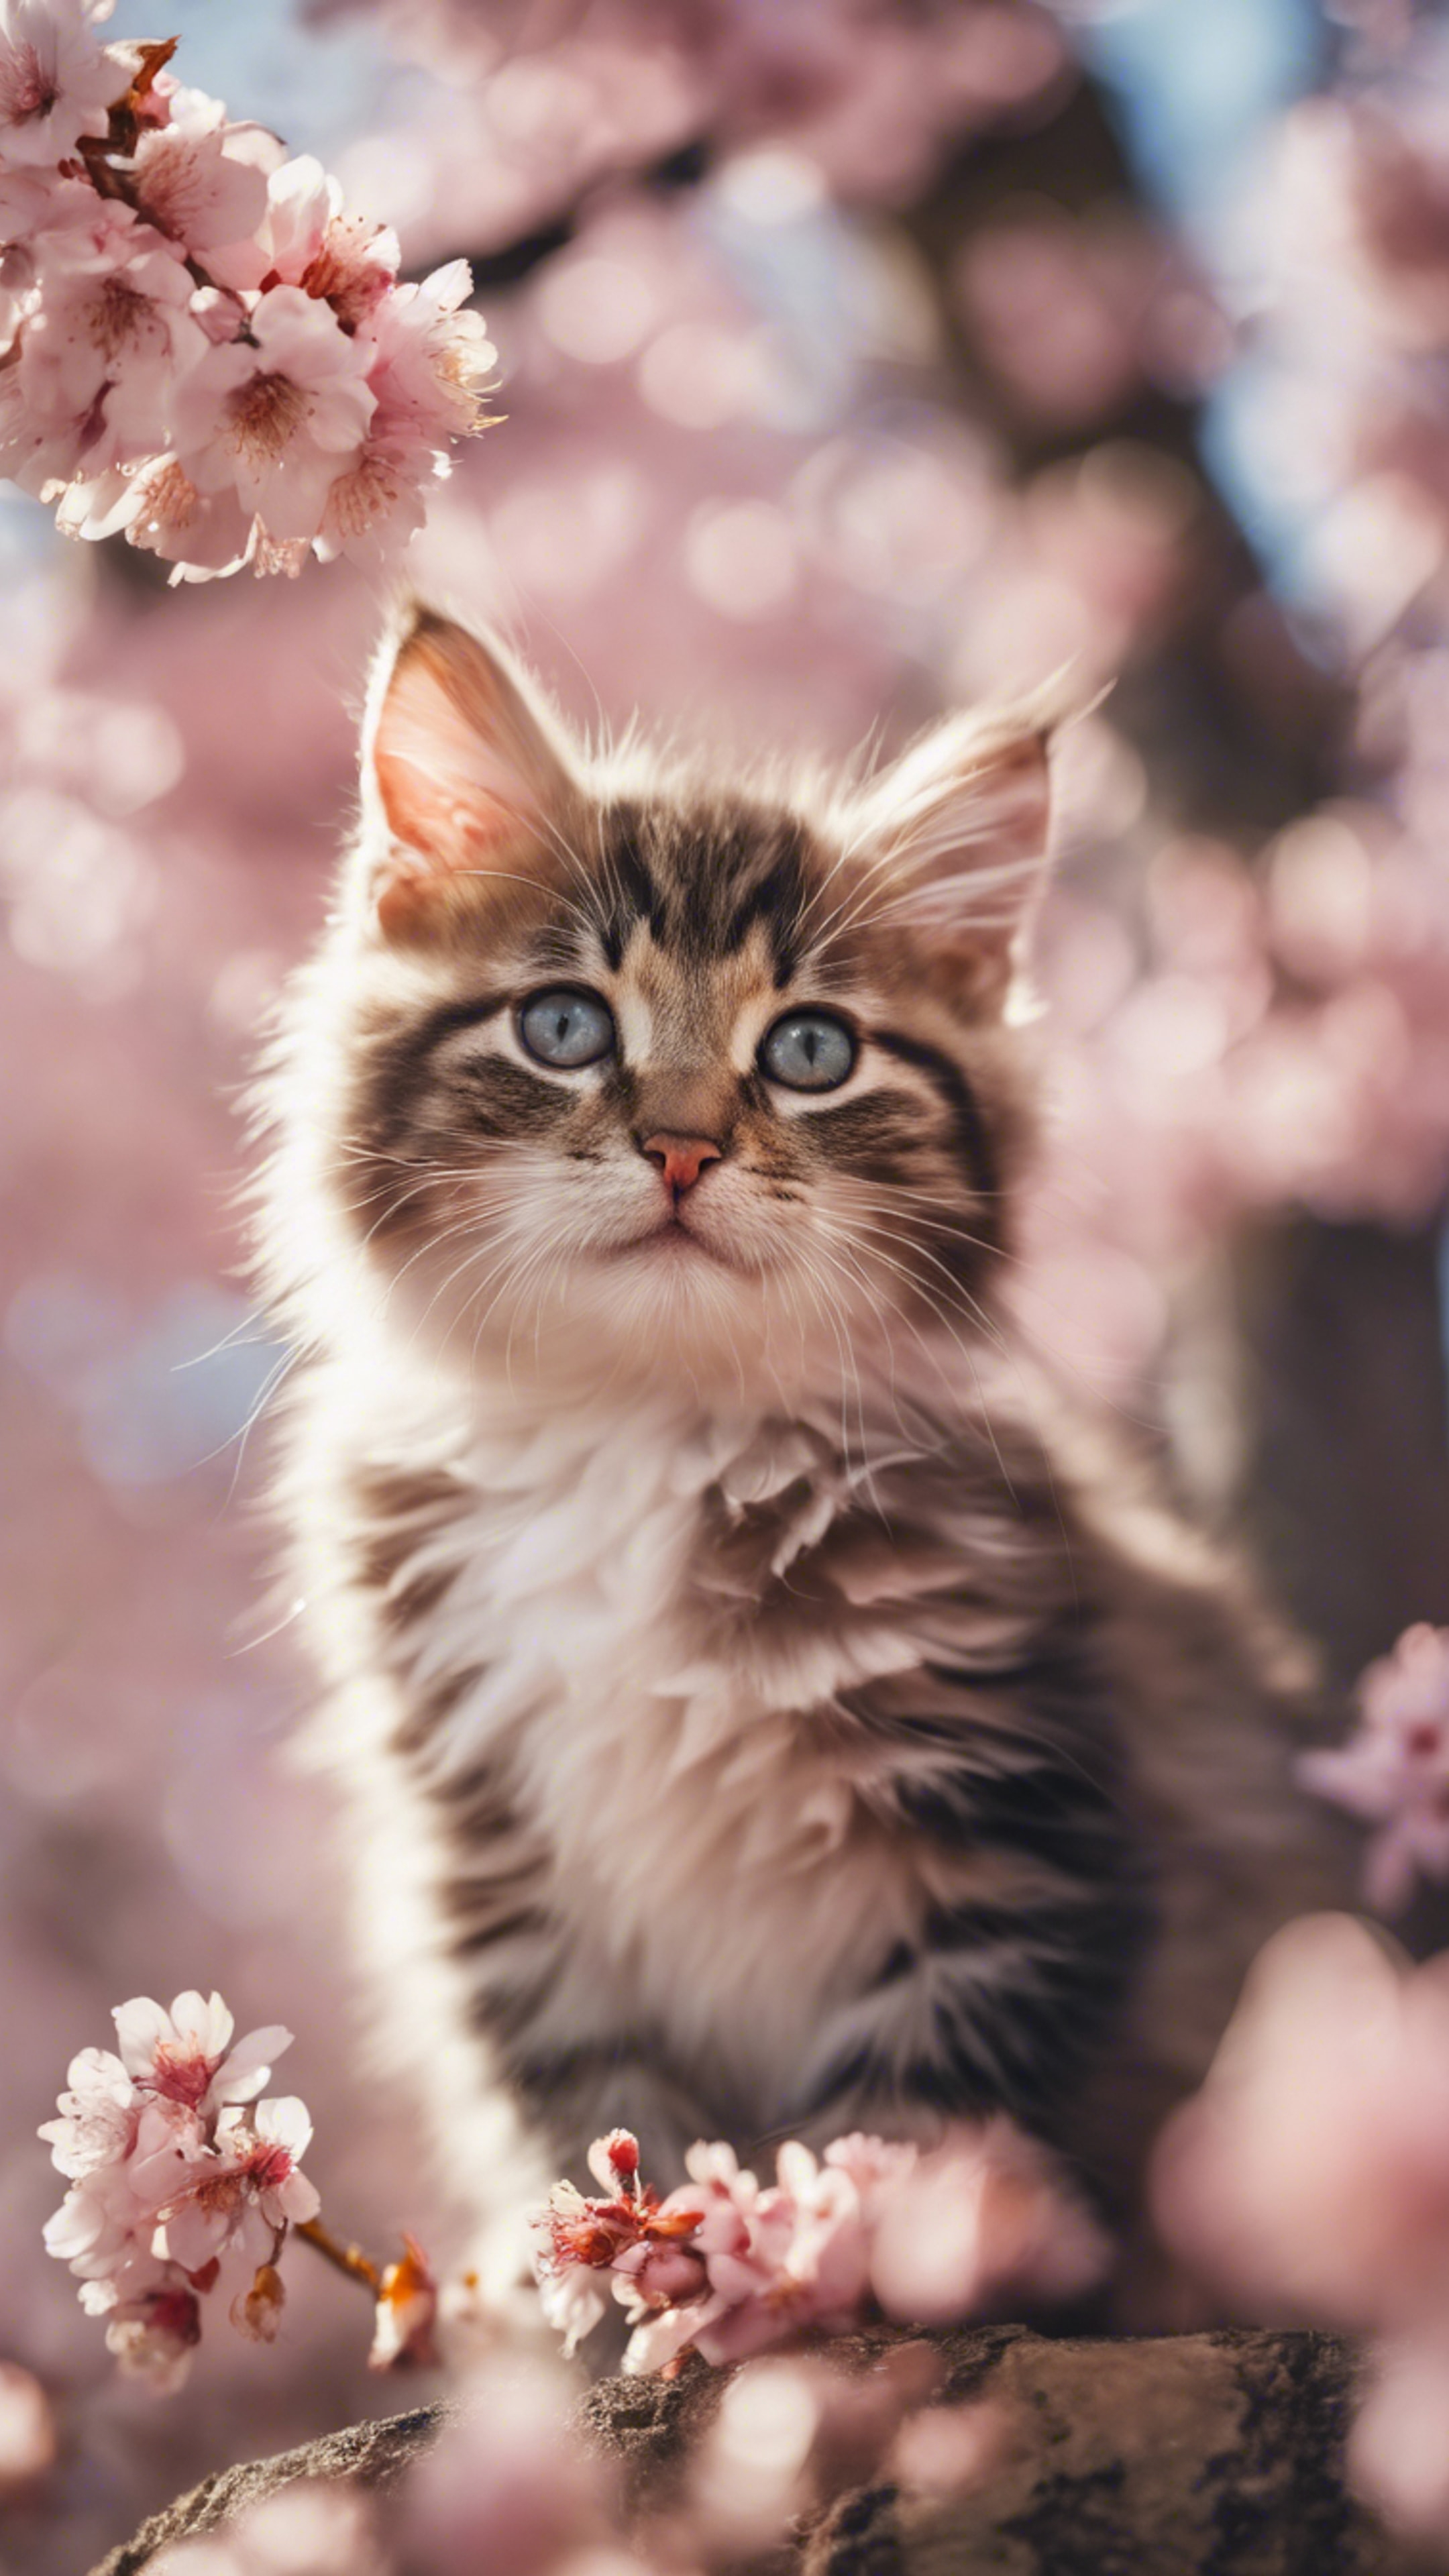 A cherry blossom tree in full bloom as the backdrop to a playful kitten in spring. Tapeta[56e1c1b9132e46d98bd1]